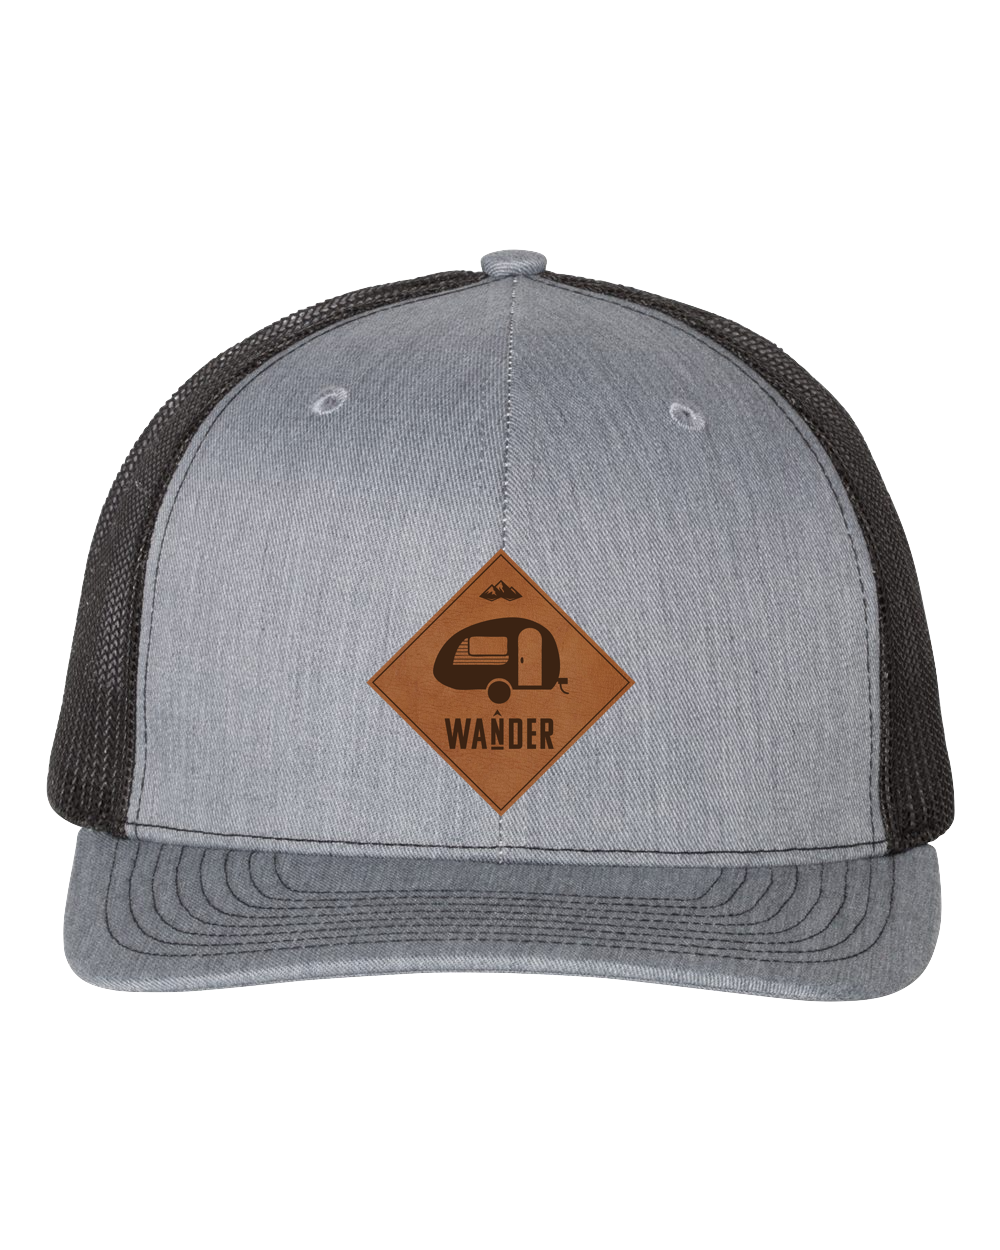 Wander Camper Leather Patch Hat - The Wanderheart Project